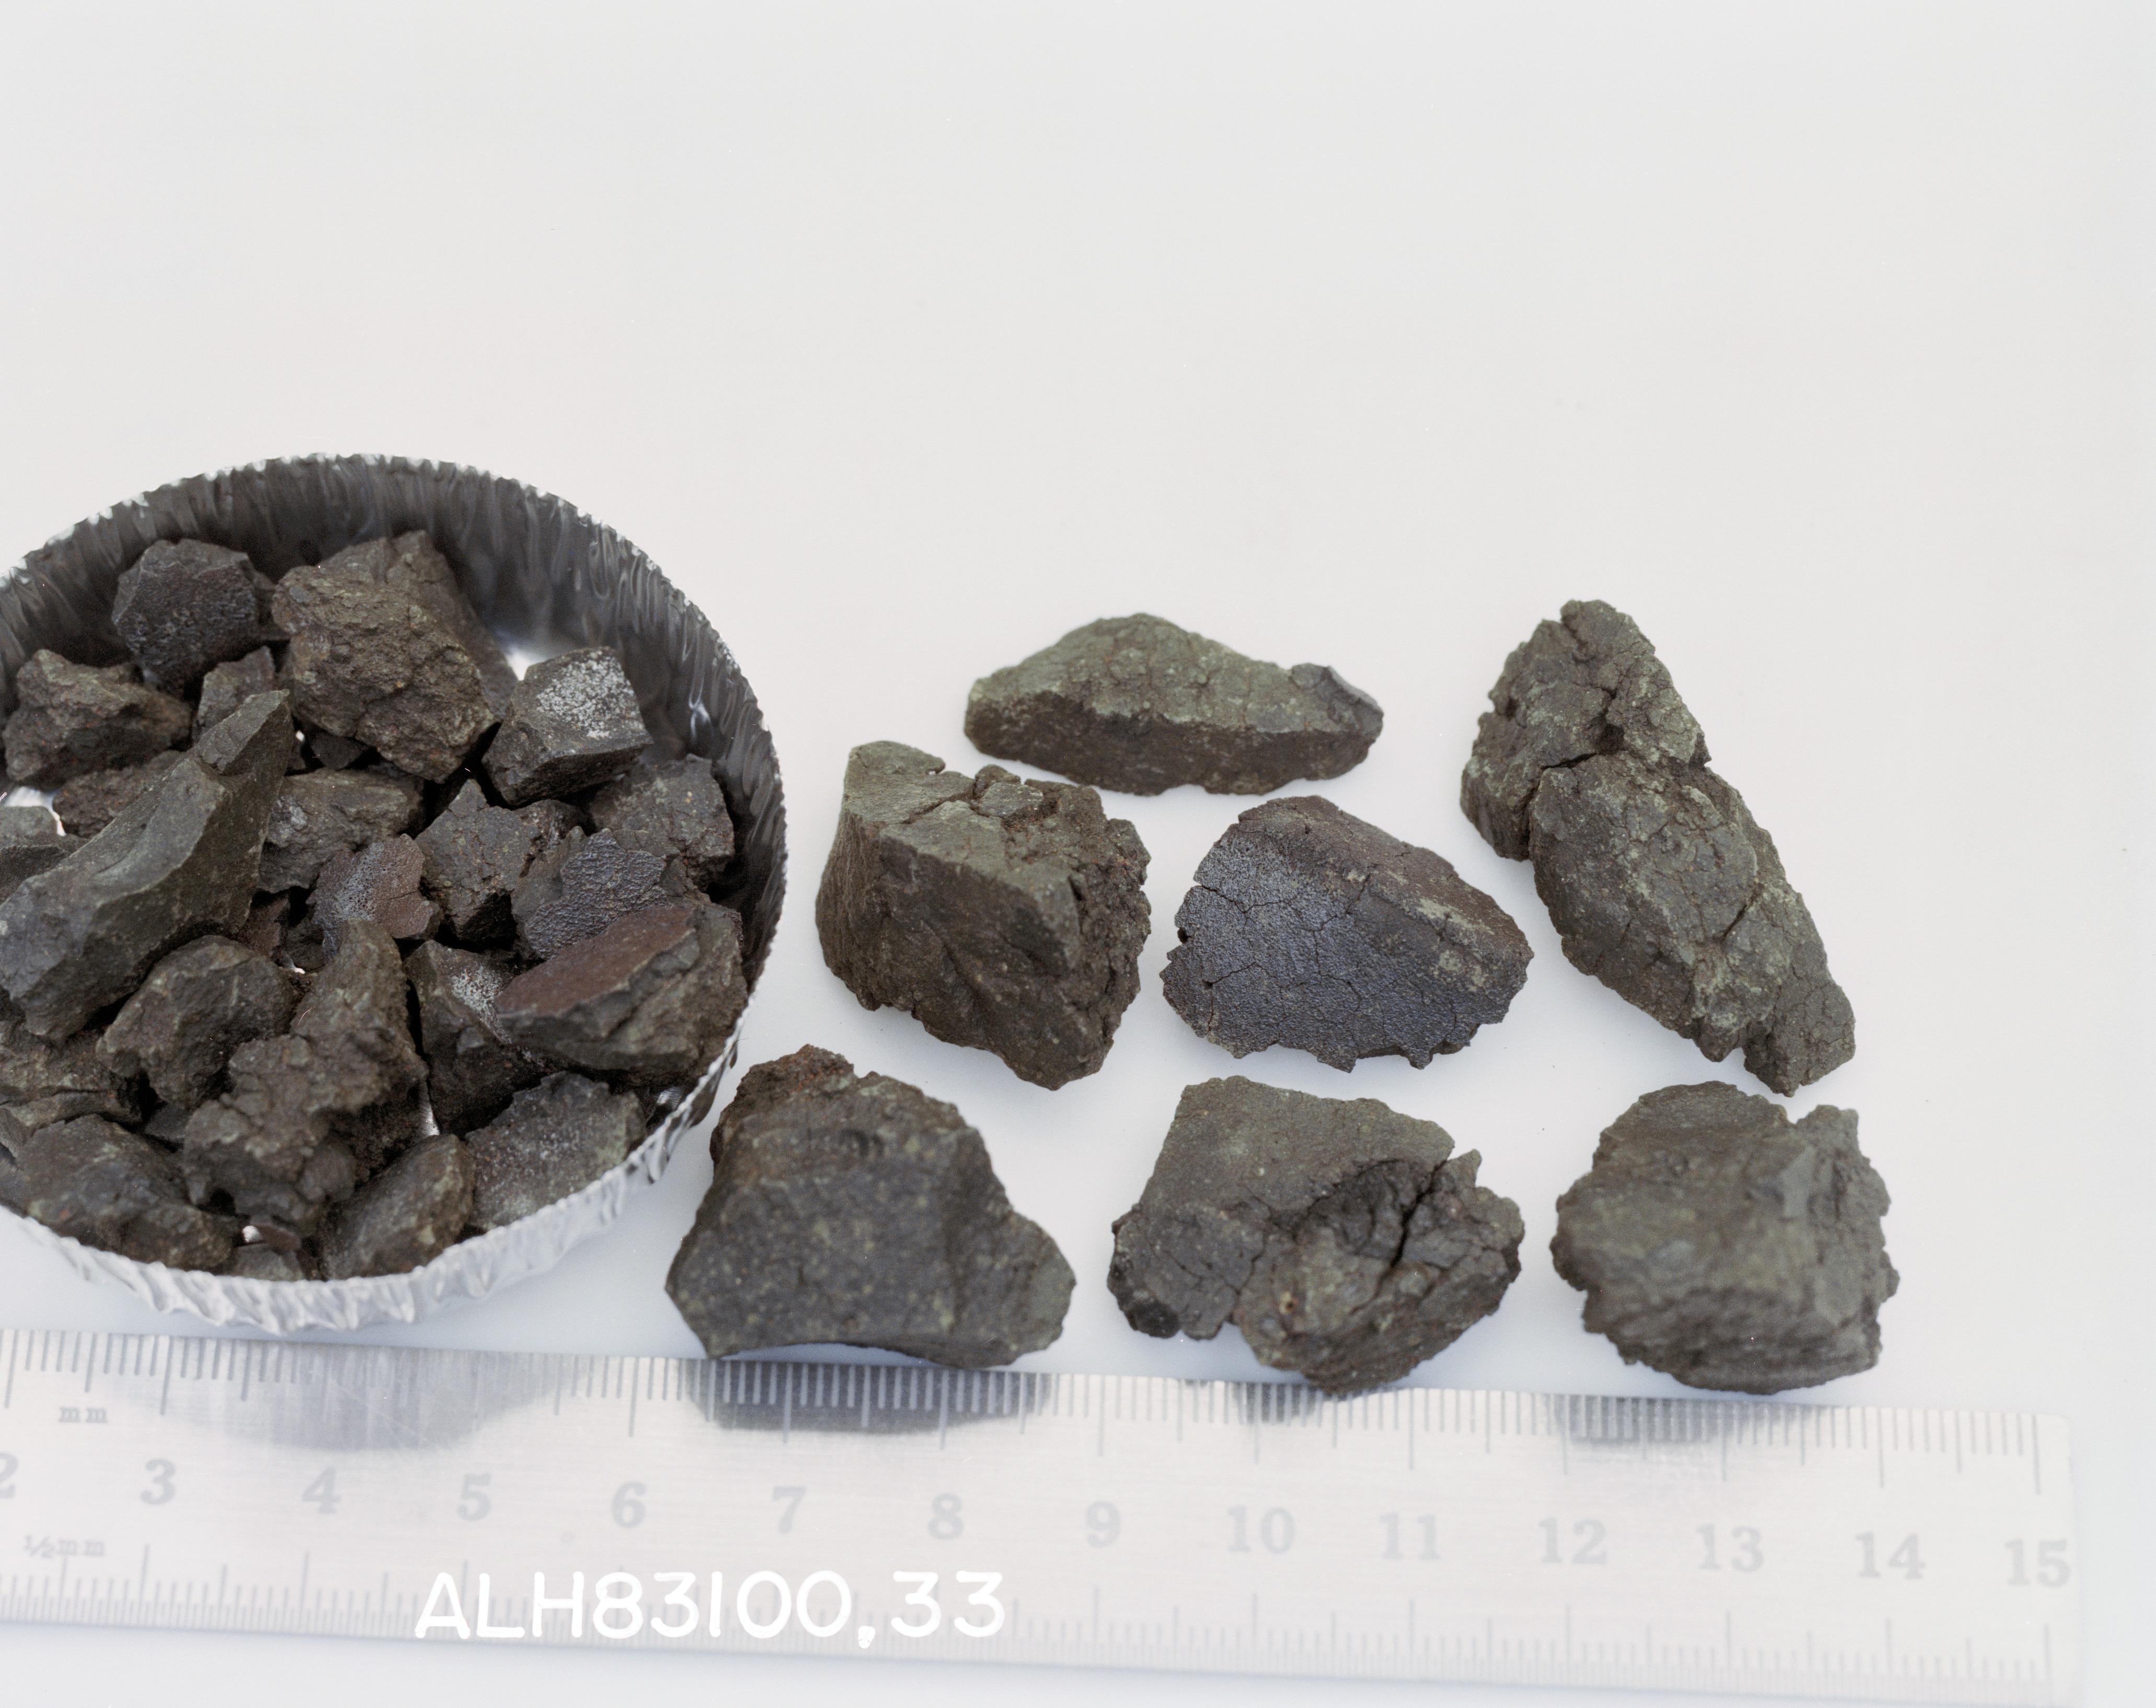 D1. Lab Photo of Sample ALH 83100 (Photo Number s86-28548)